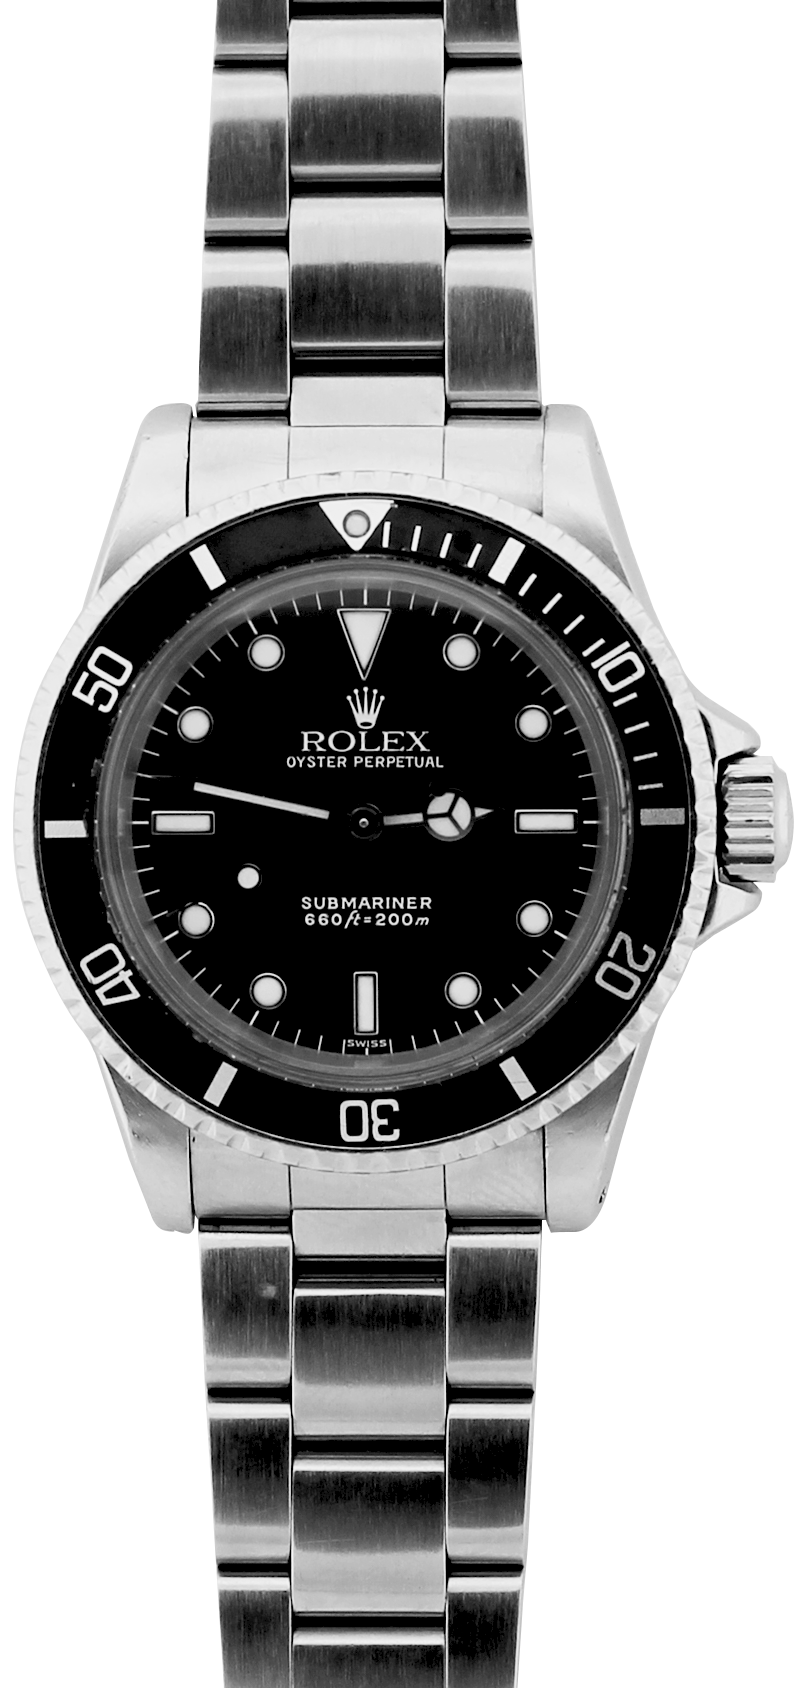 Vintage Rolex Steel Gloss Dial White Gold Surrounds Submariner 5513